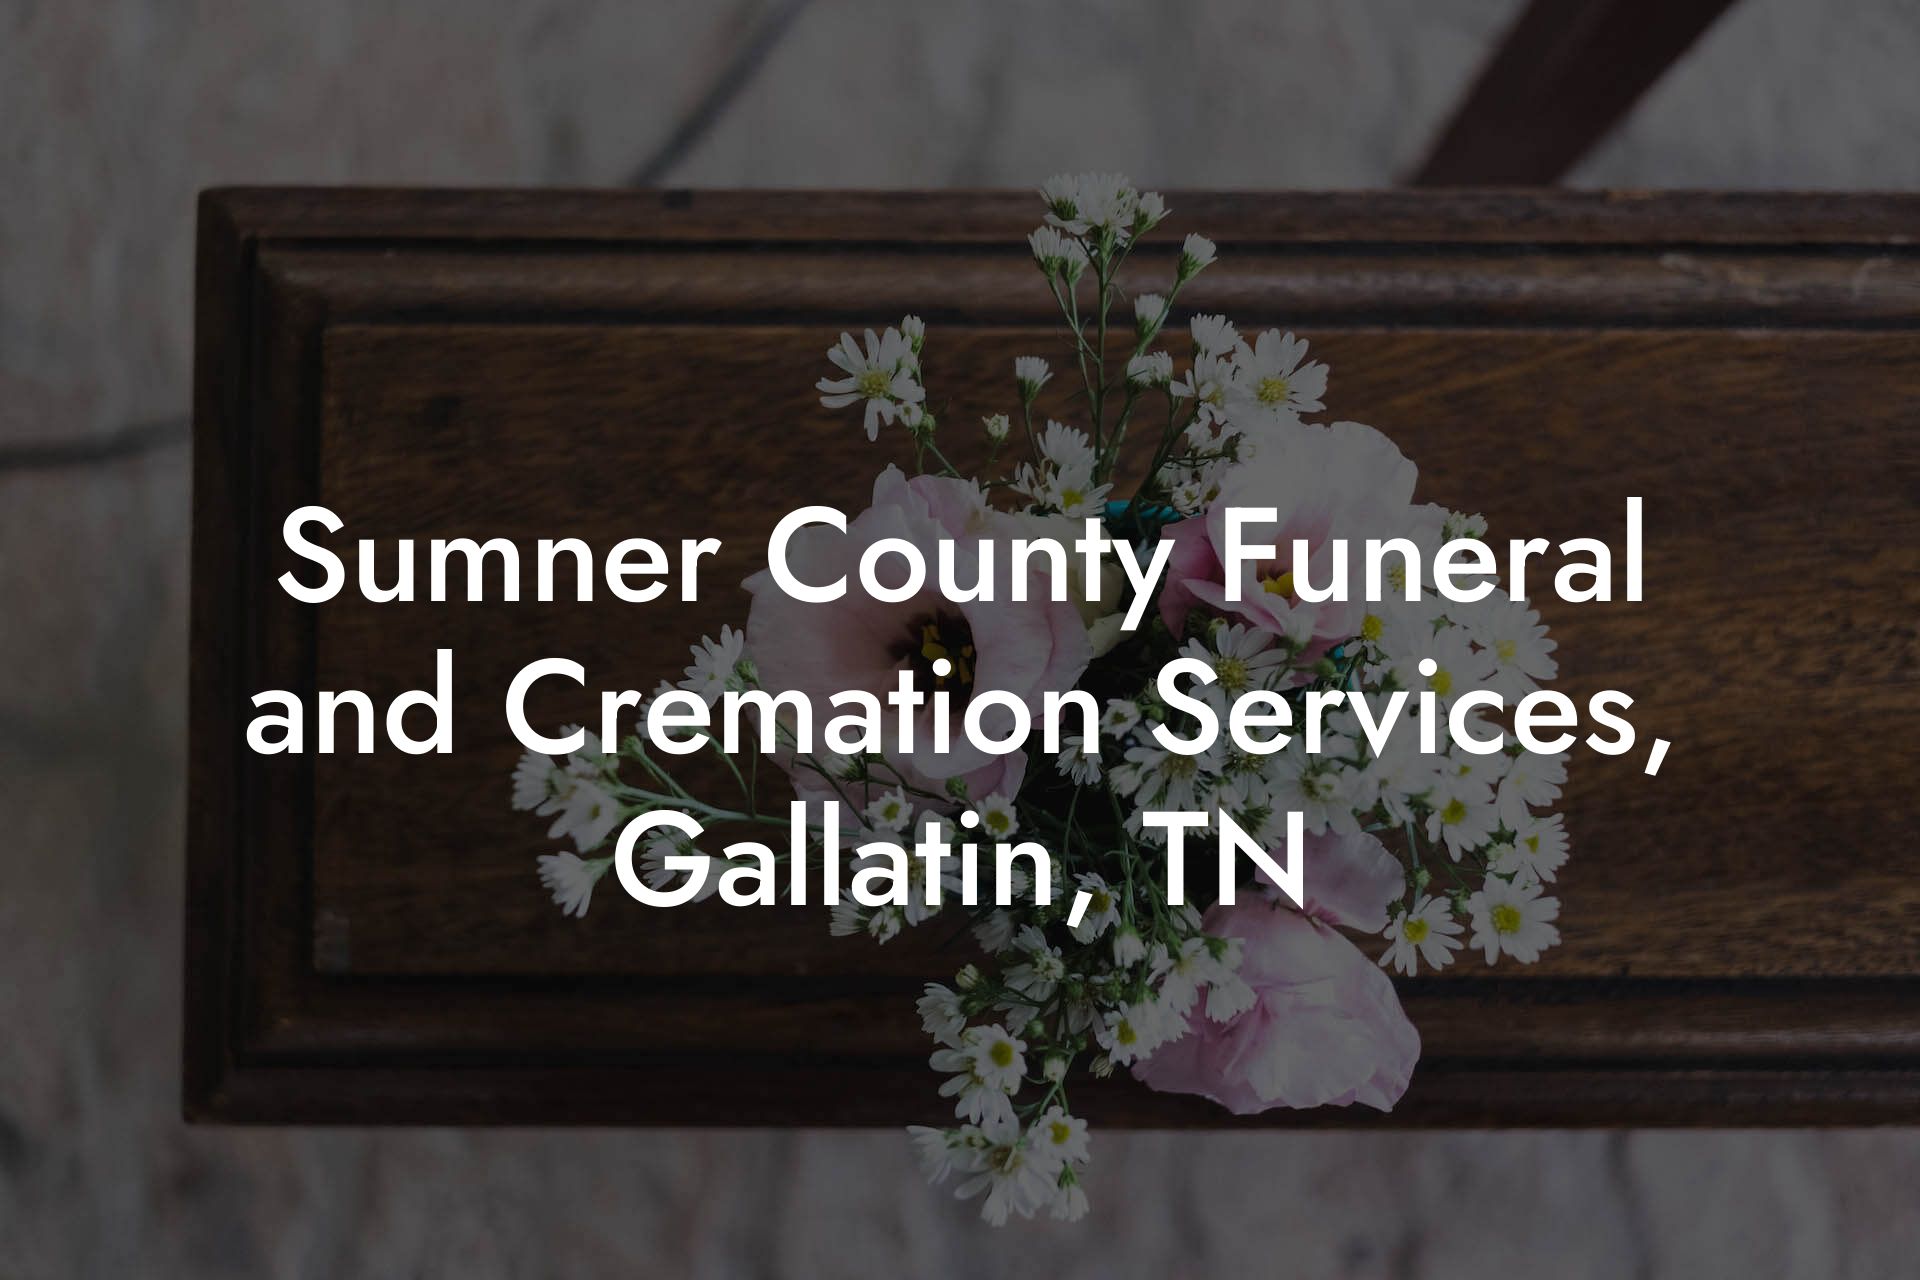 Sumner County Funeral and Cremation Services Gallatin TN